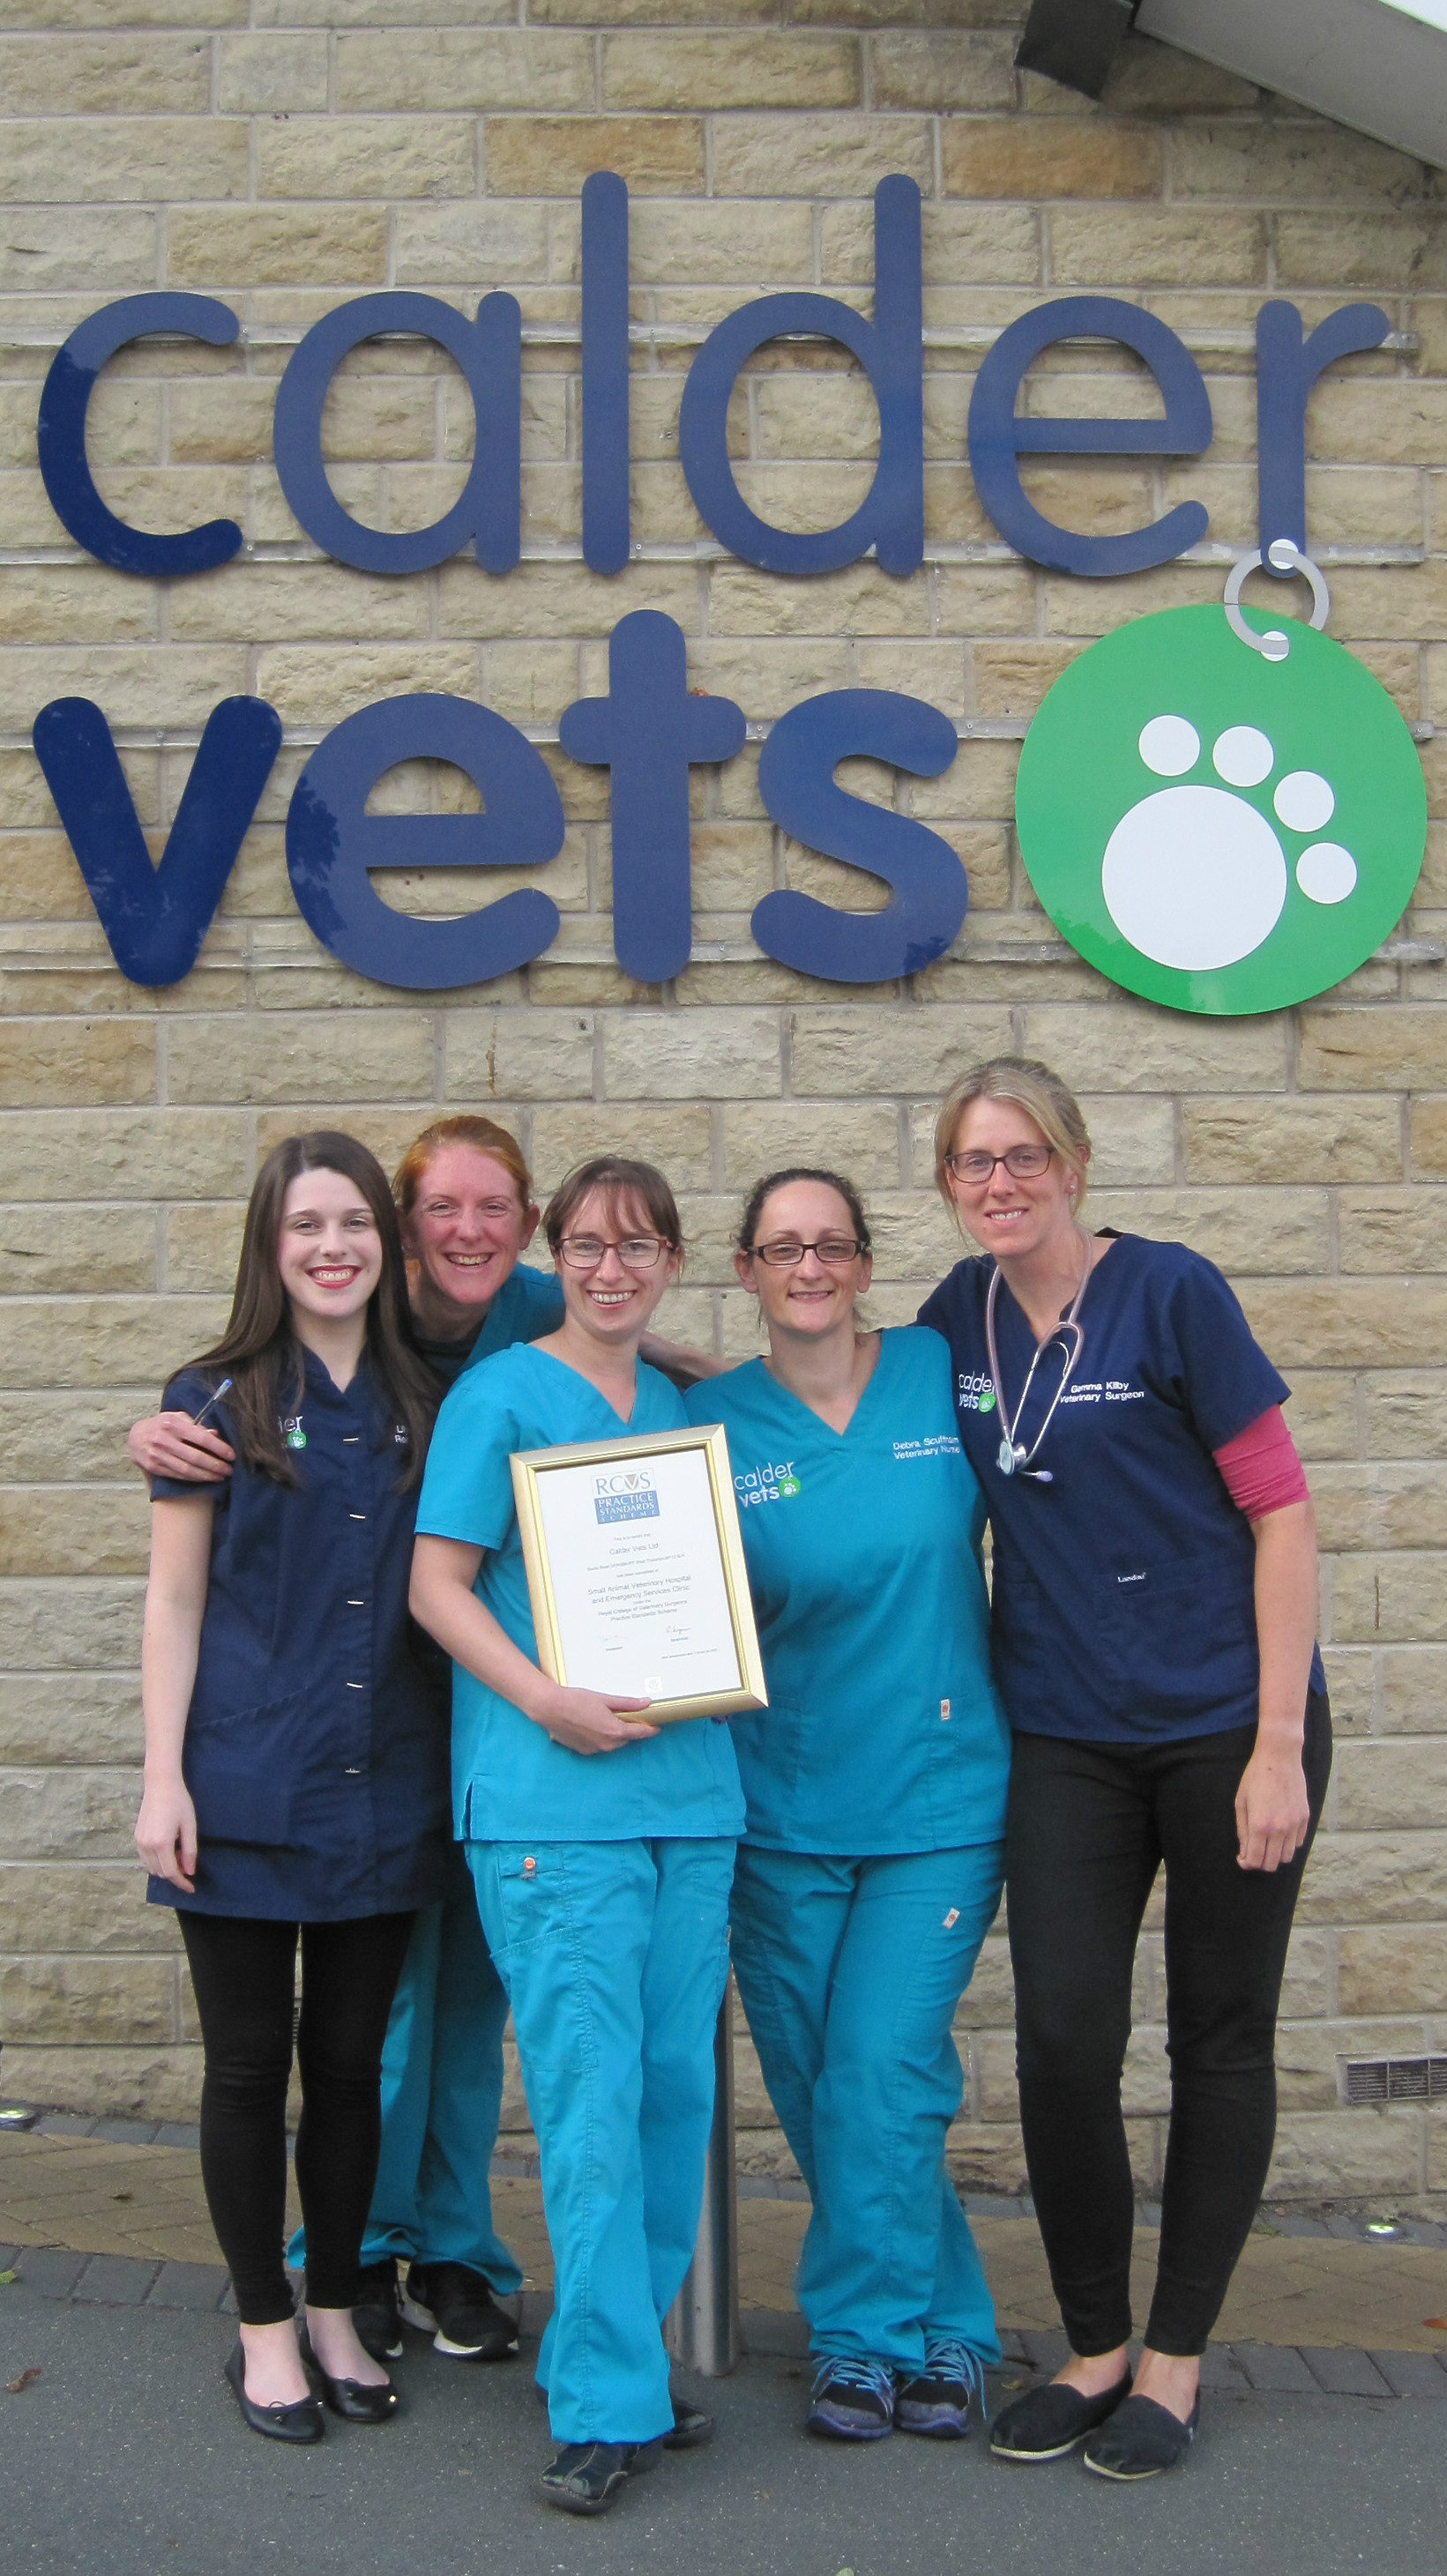 Calder Vets recognised as outstanding by RCVS